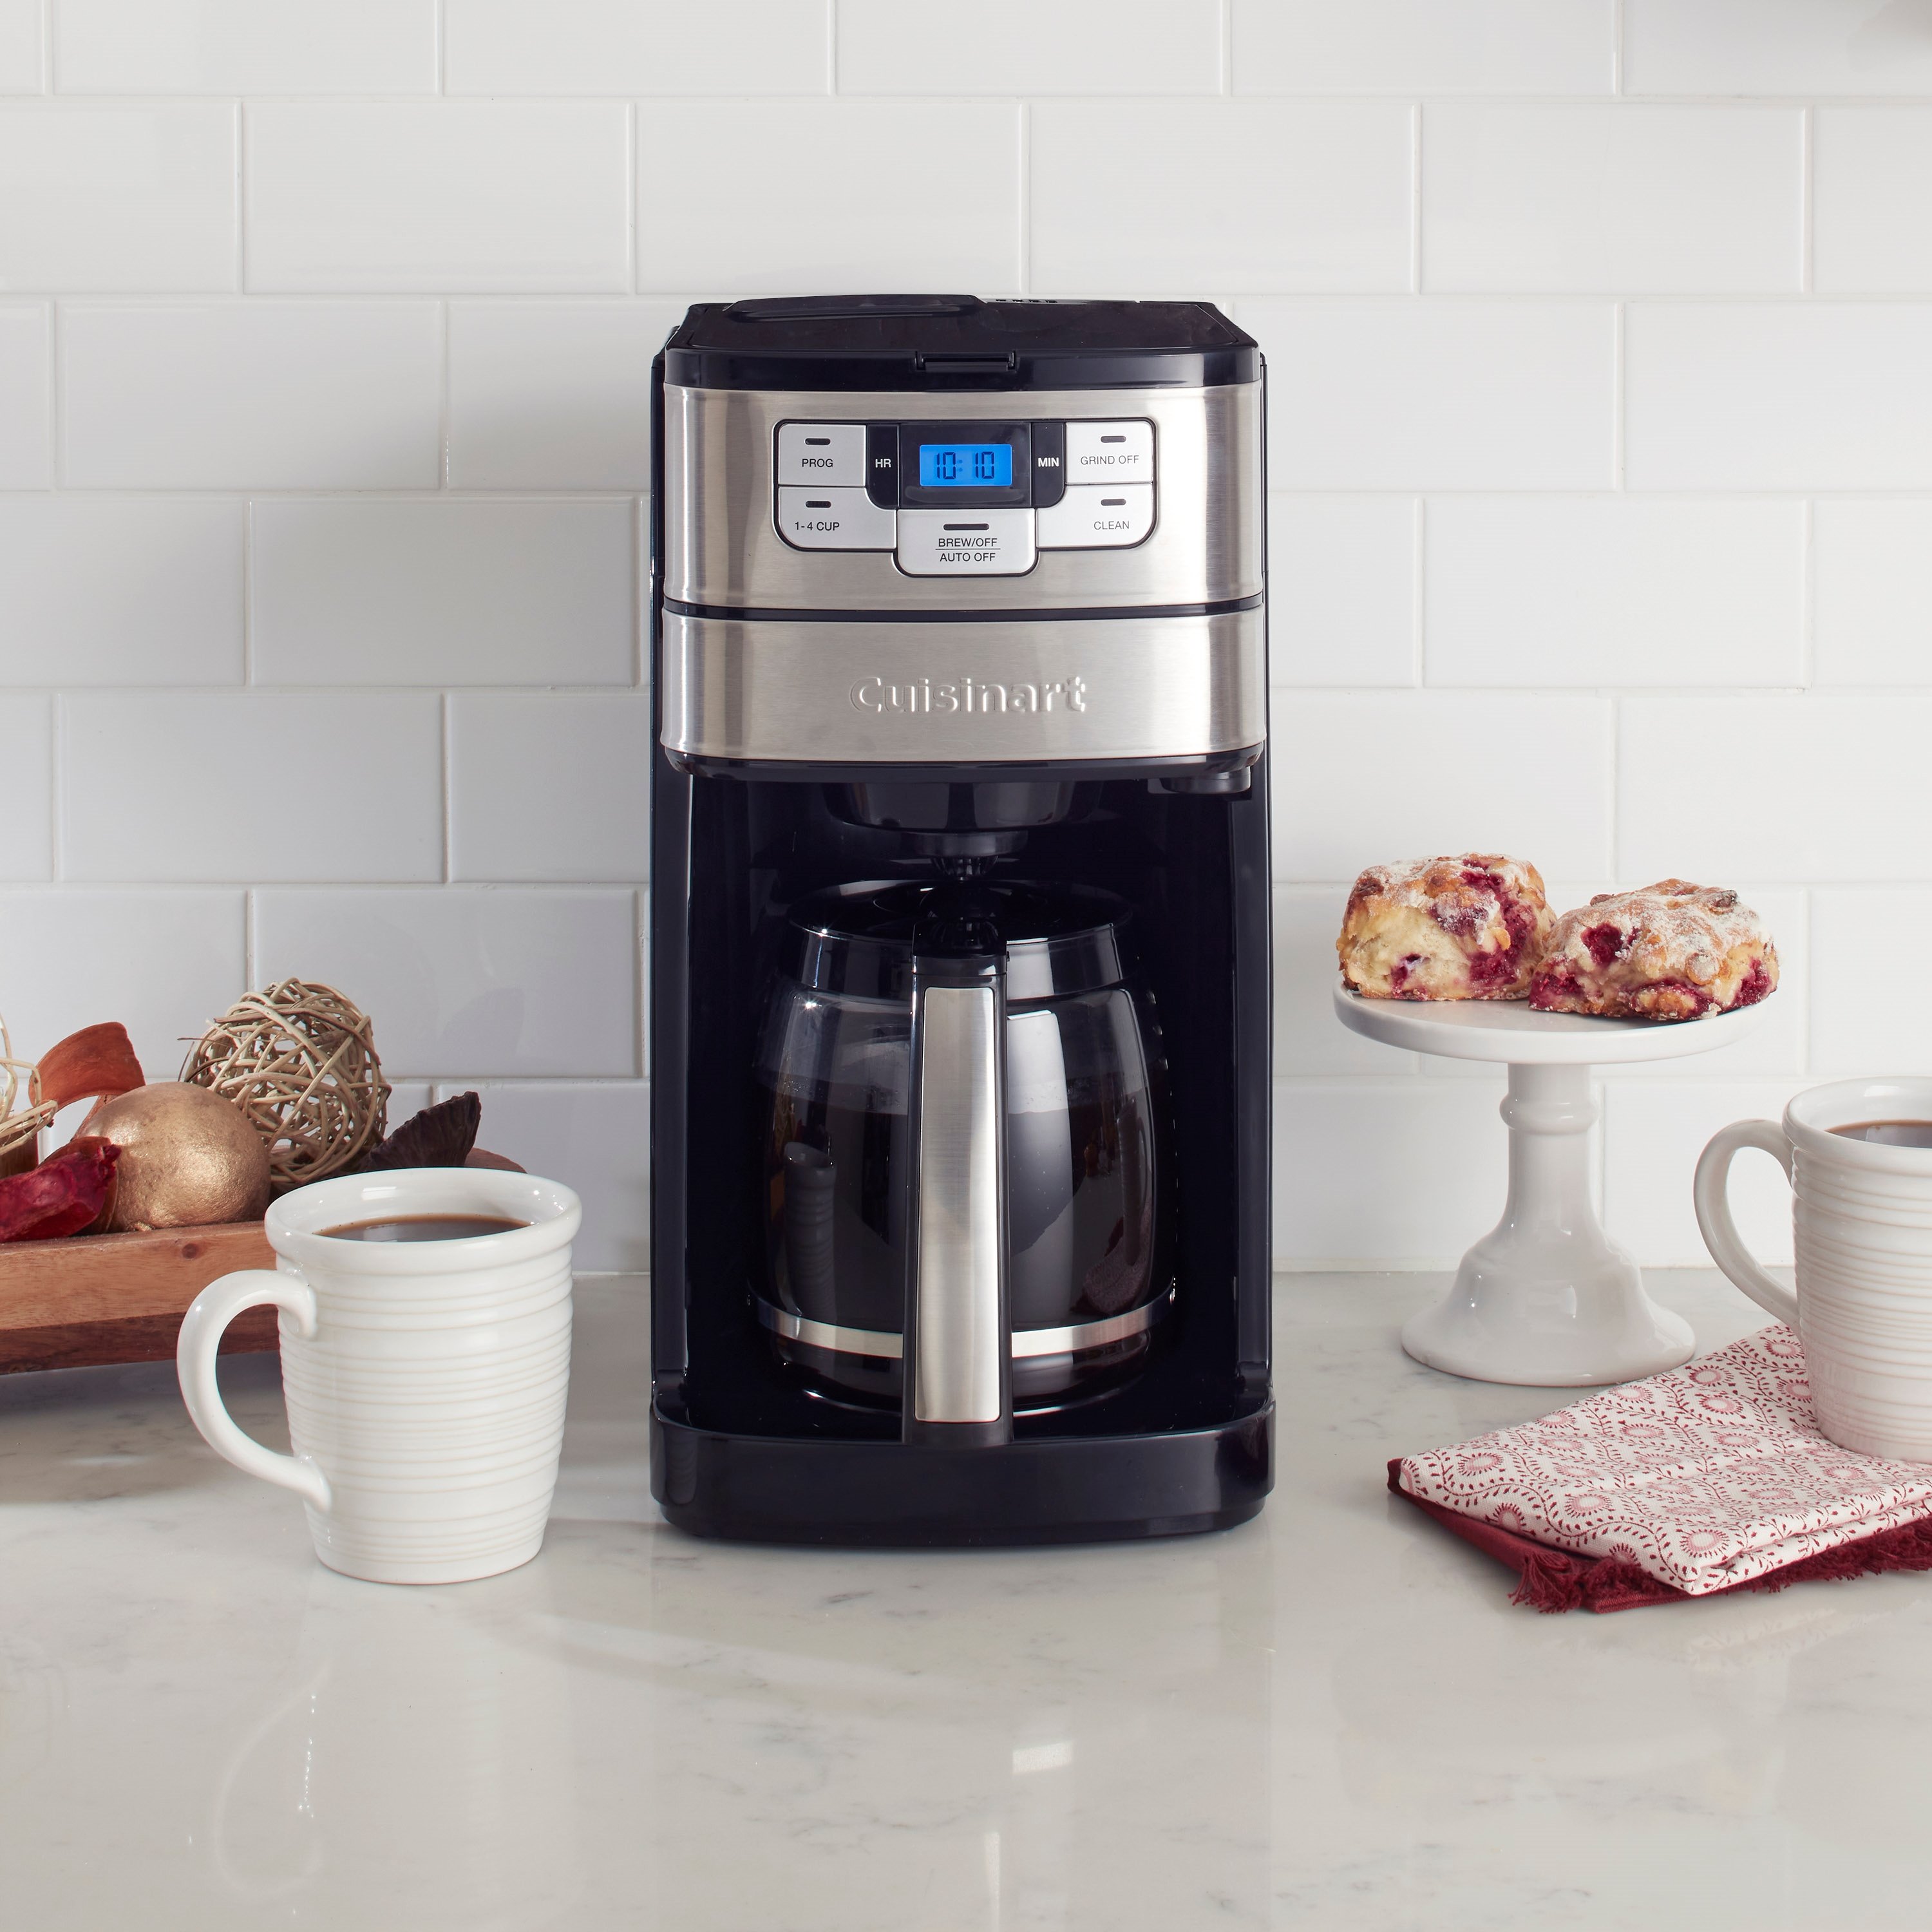 How To Clean Cuisinart Coffee Maker With A Grinder  